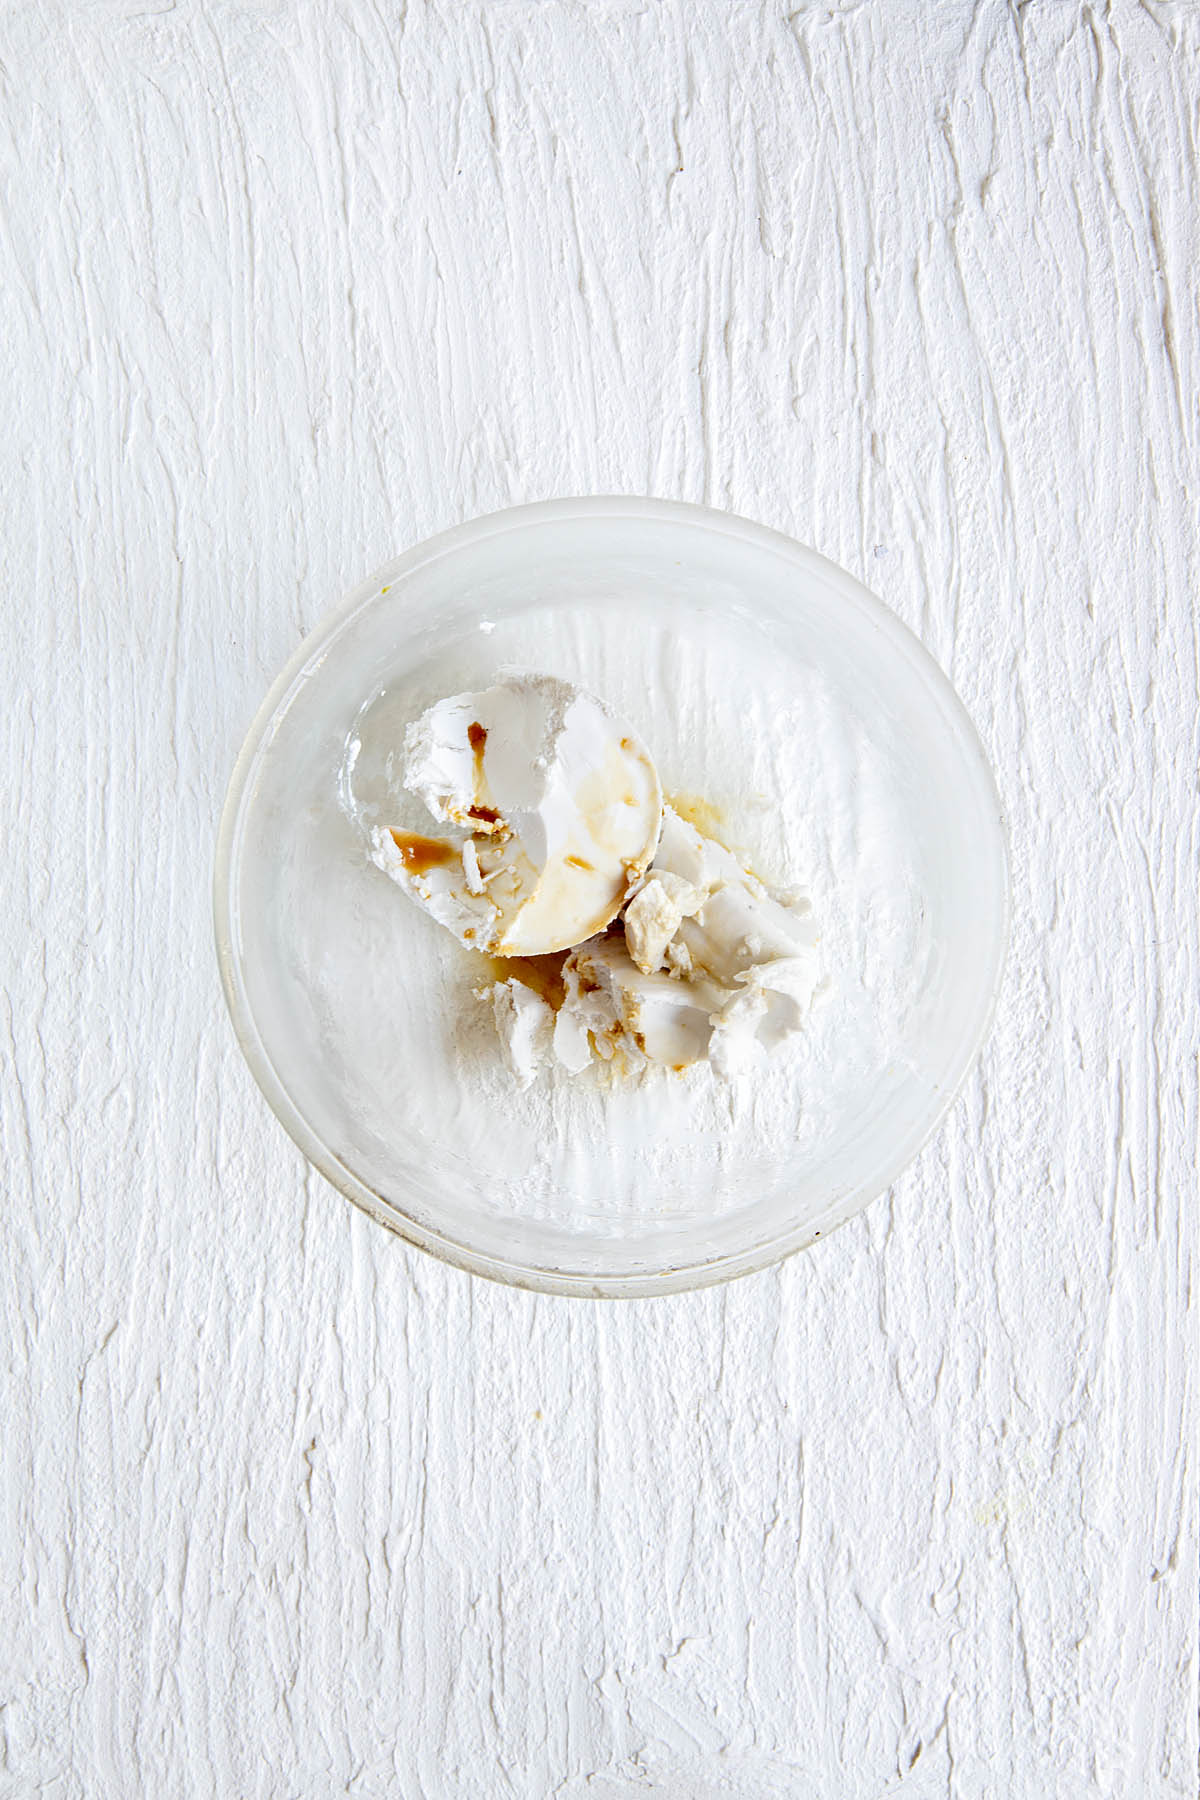 Coconut cream and vanilla extract in a bowl.